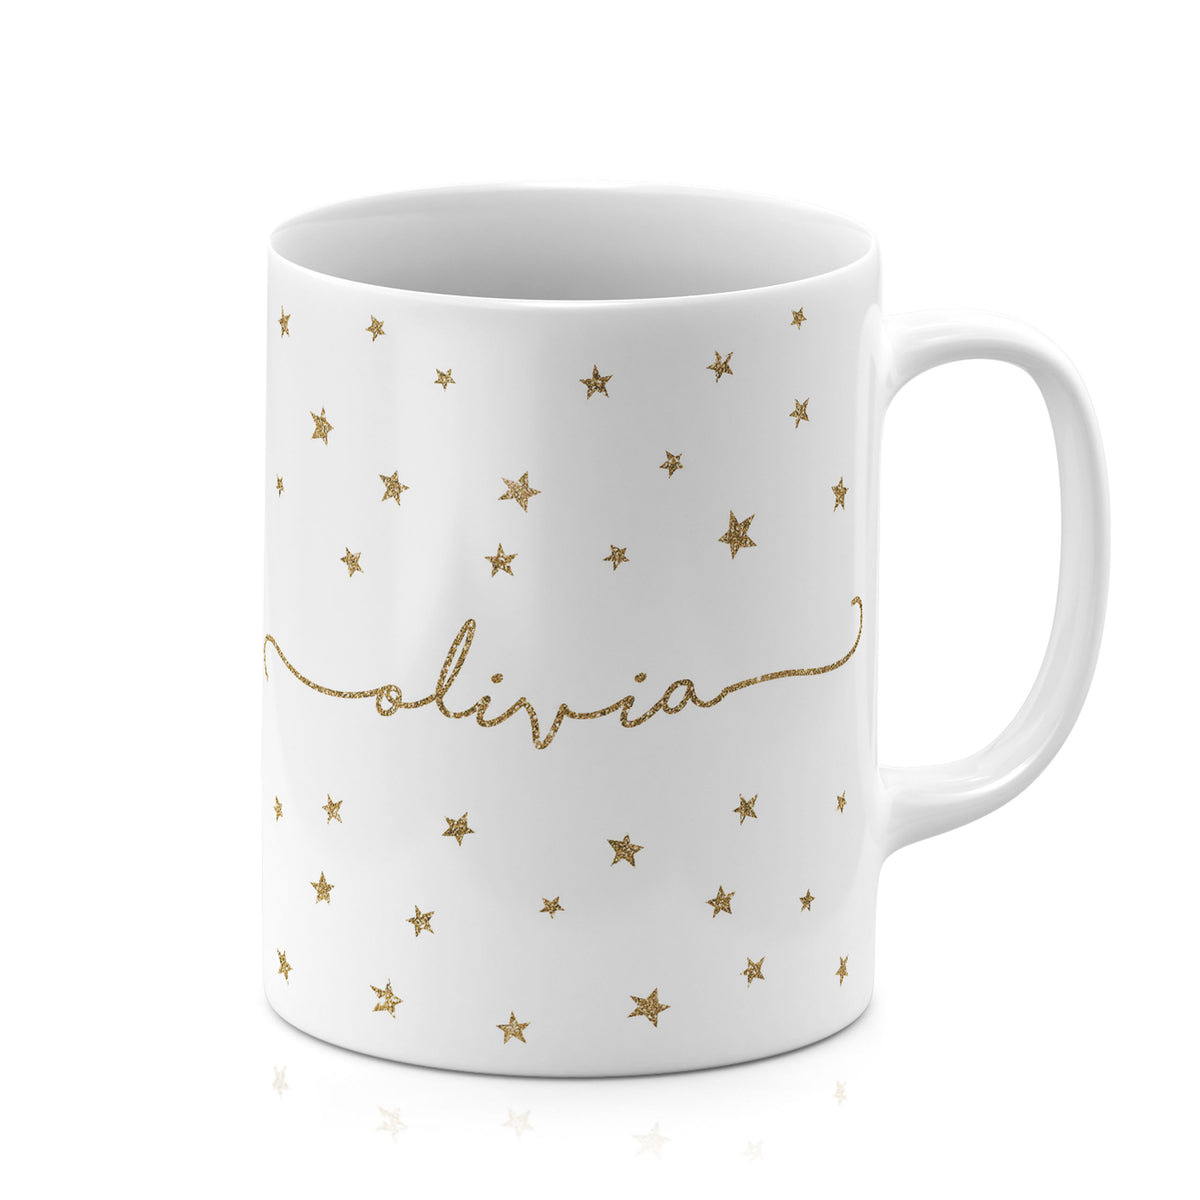 Personalised Ceramic Mug with Name Initials Text Golden Stars Glitter Effect